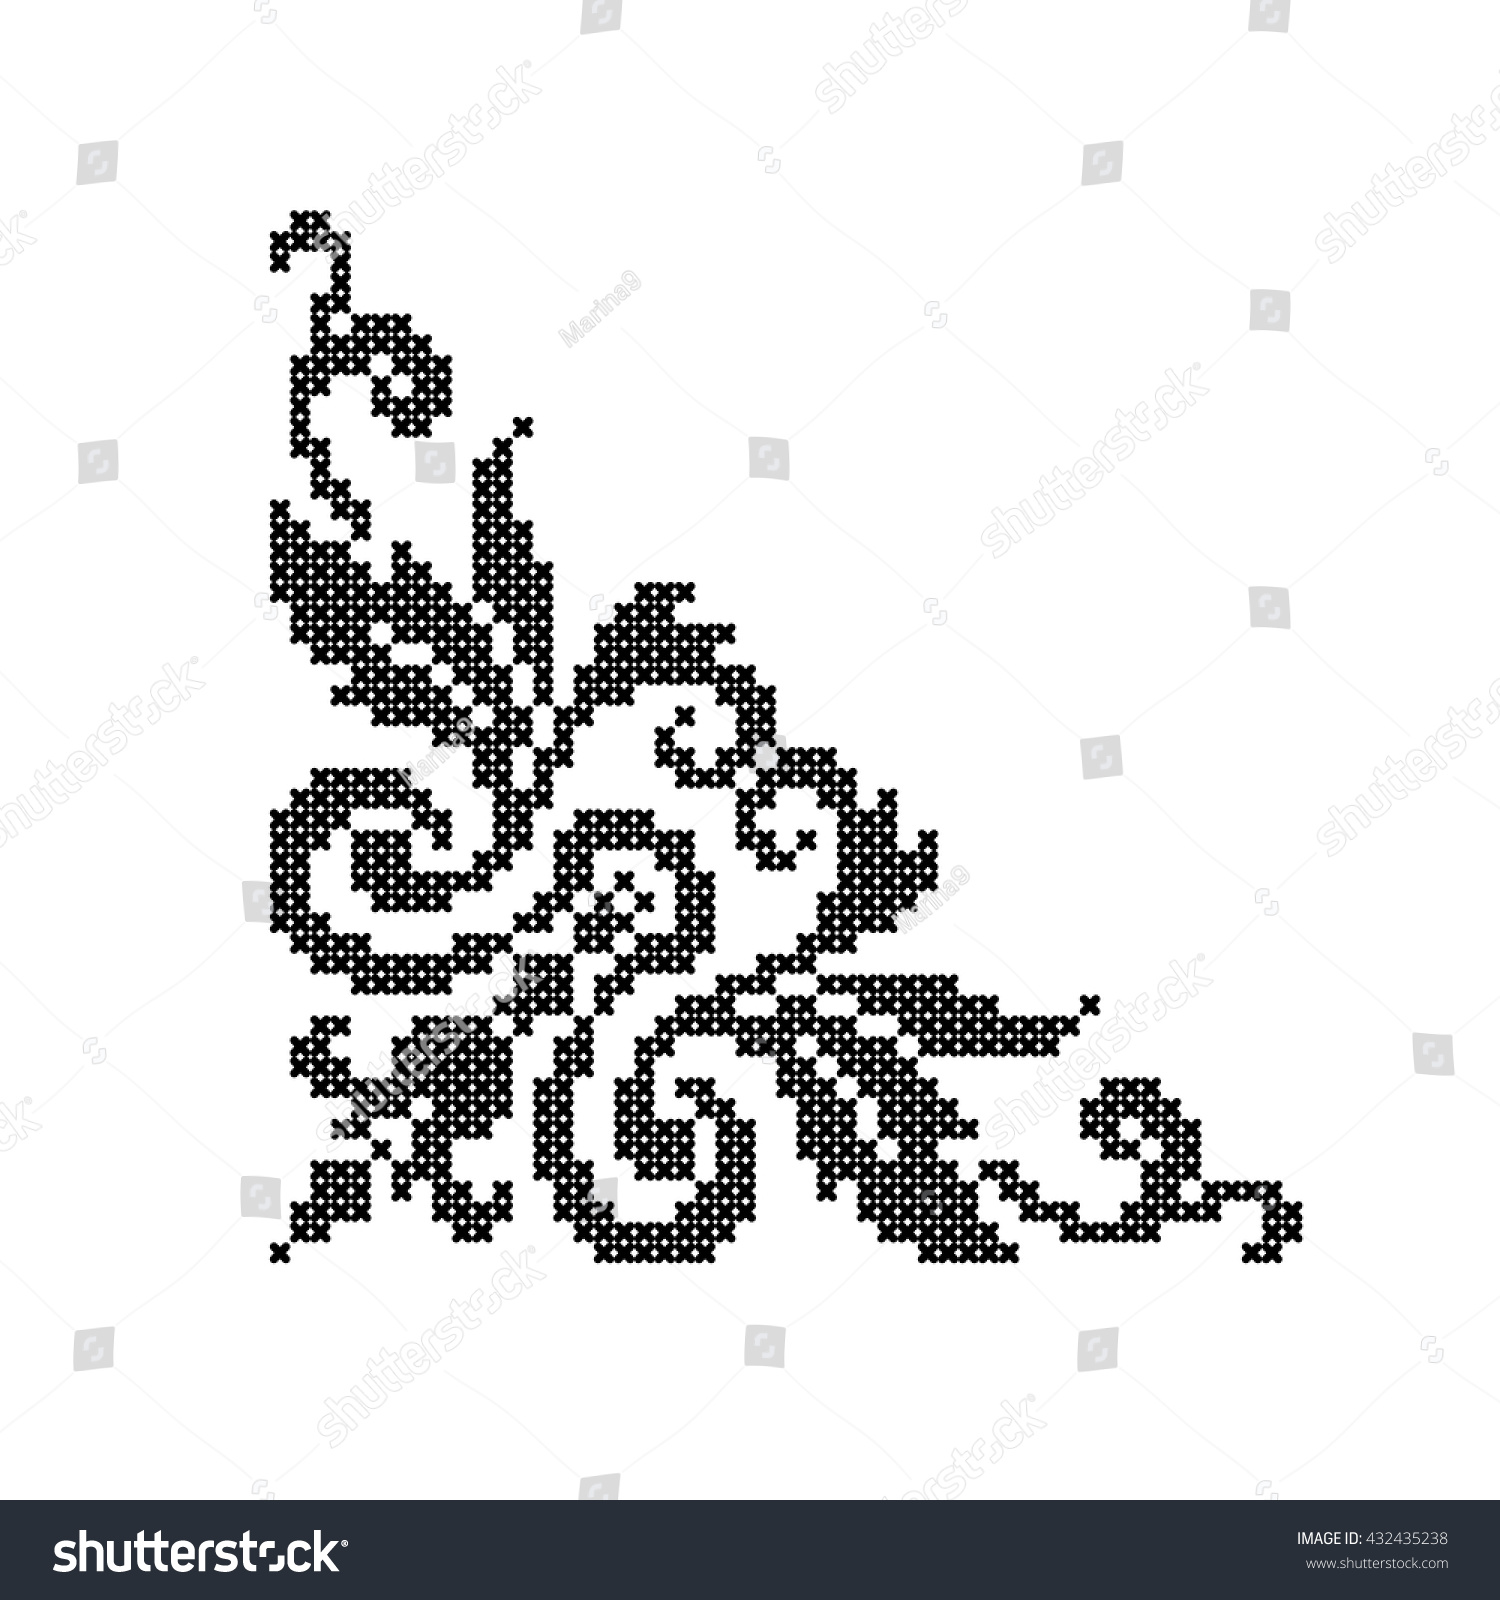 Floral Ornament Corner Pattern Scheme Of Knitting And Embroidery Cross Stitch Vector